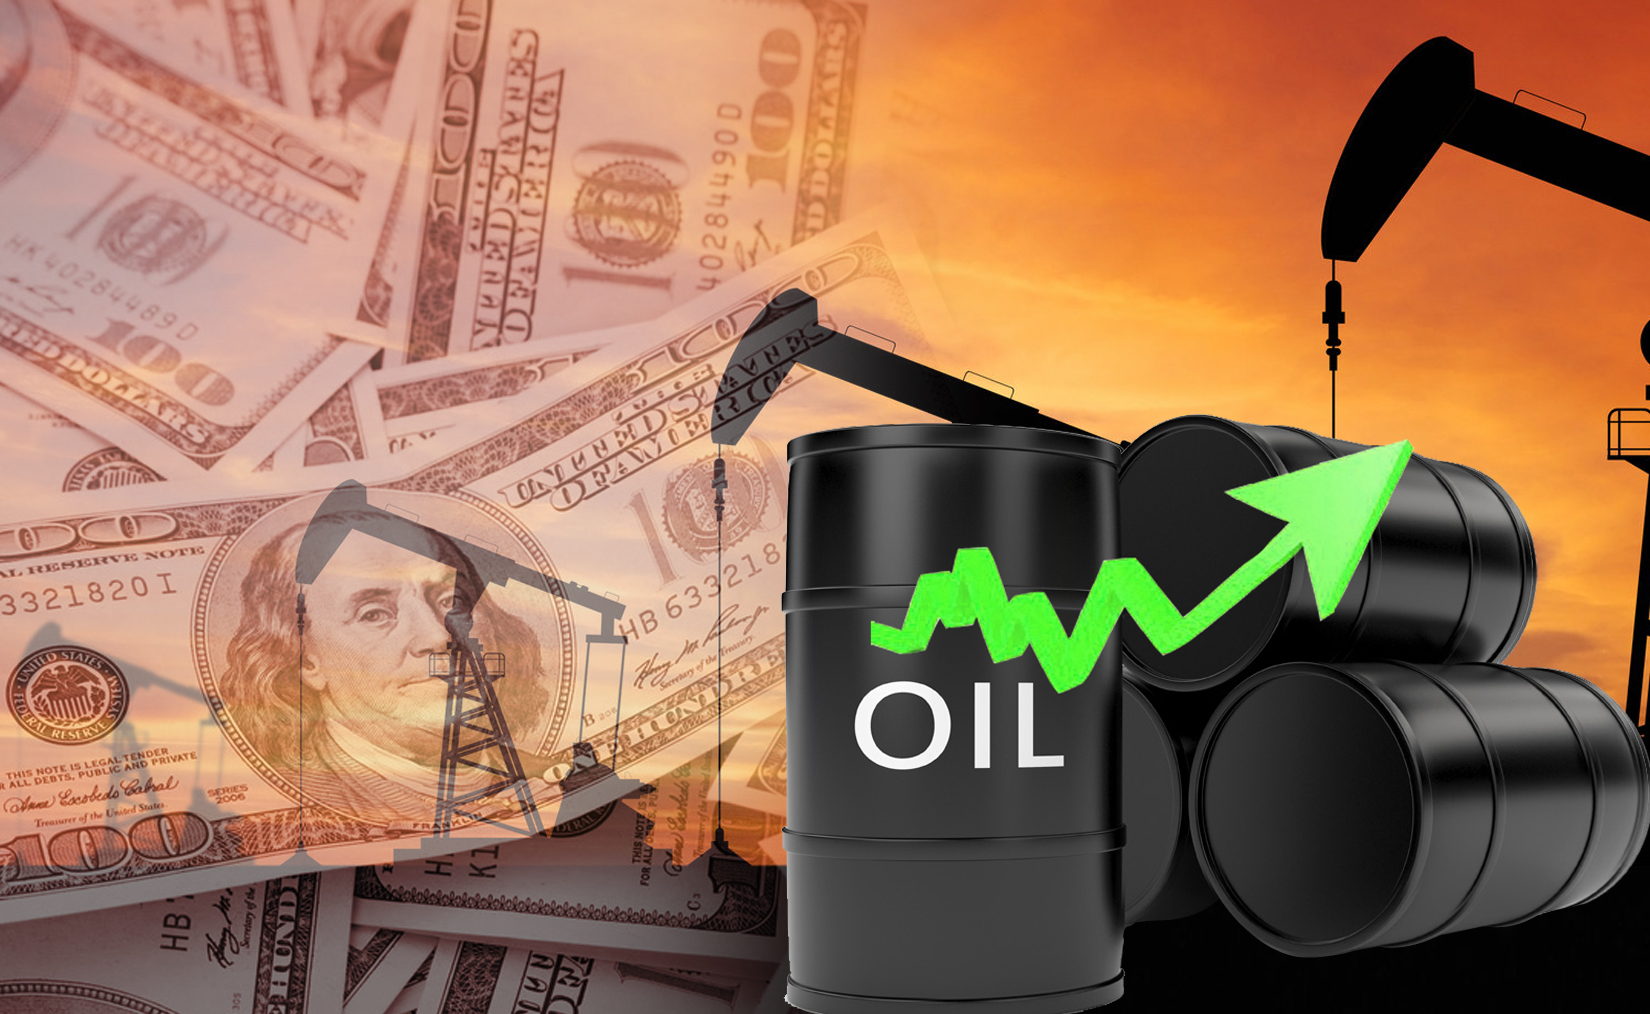 Kuwait oil price up 2 cents to USD 70.72 bp                                                                                                                                                                                                               